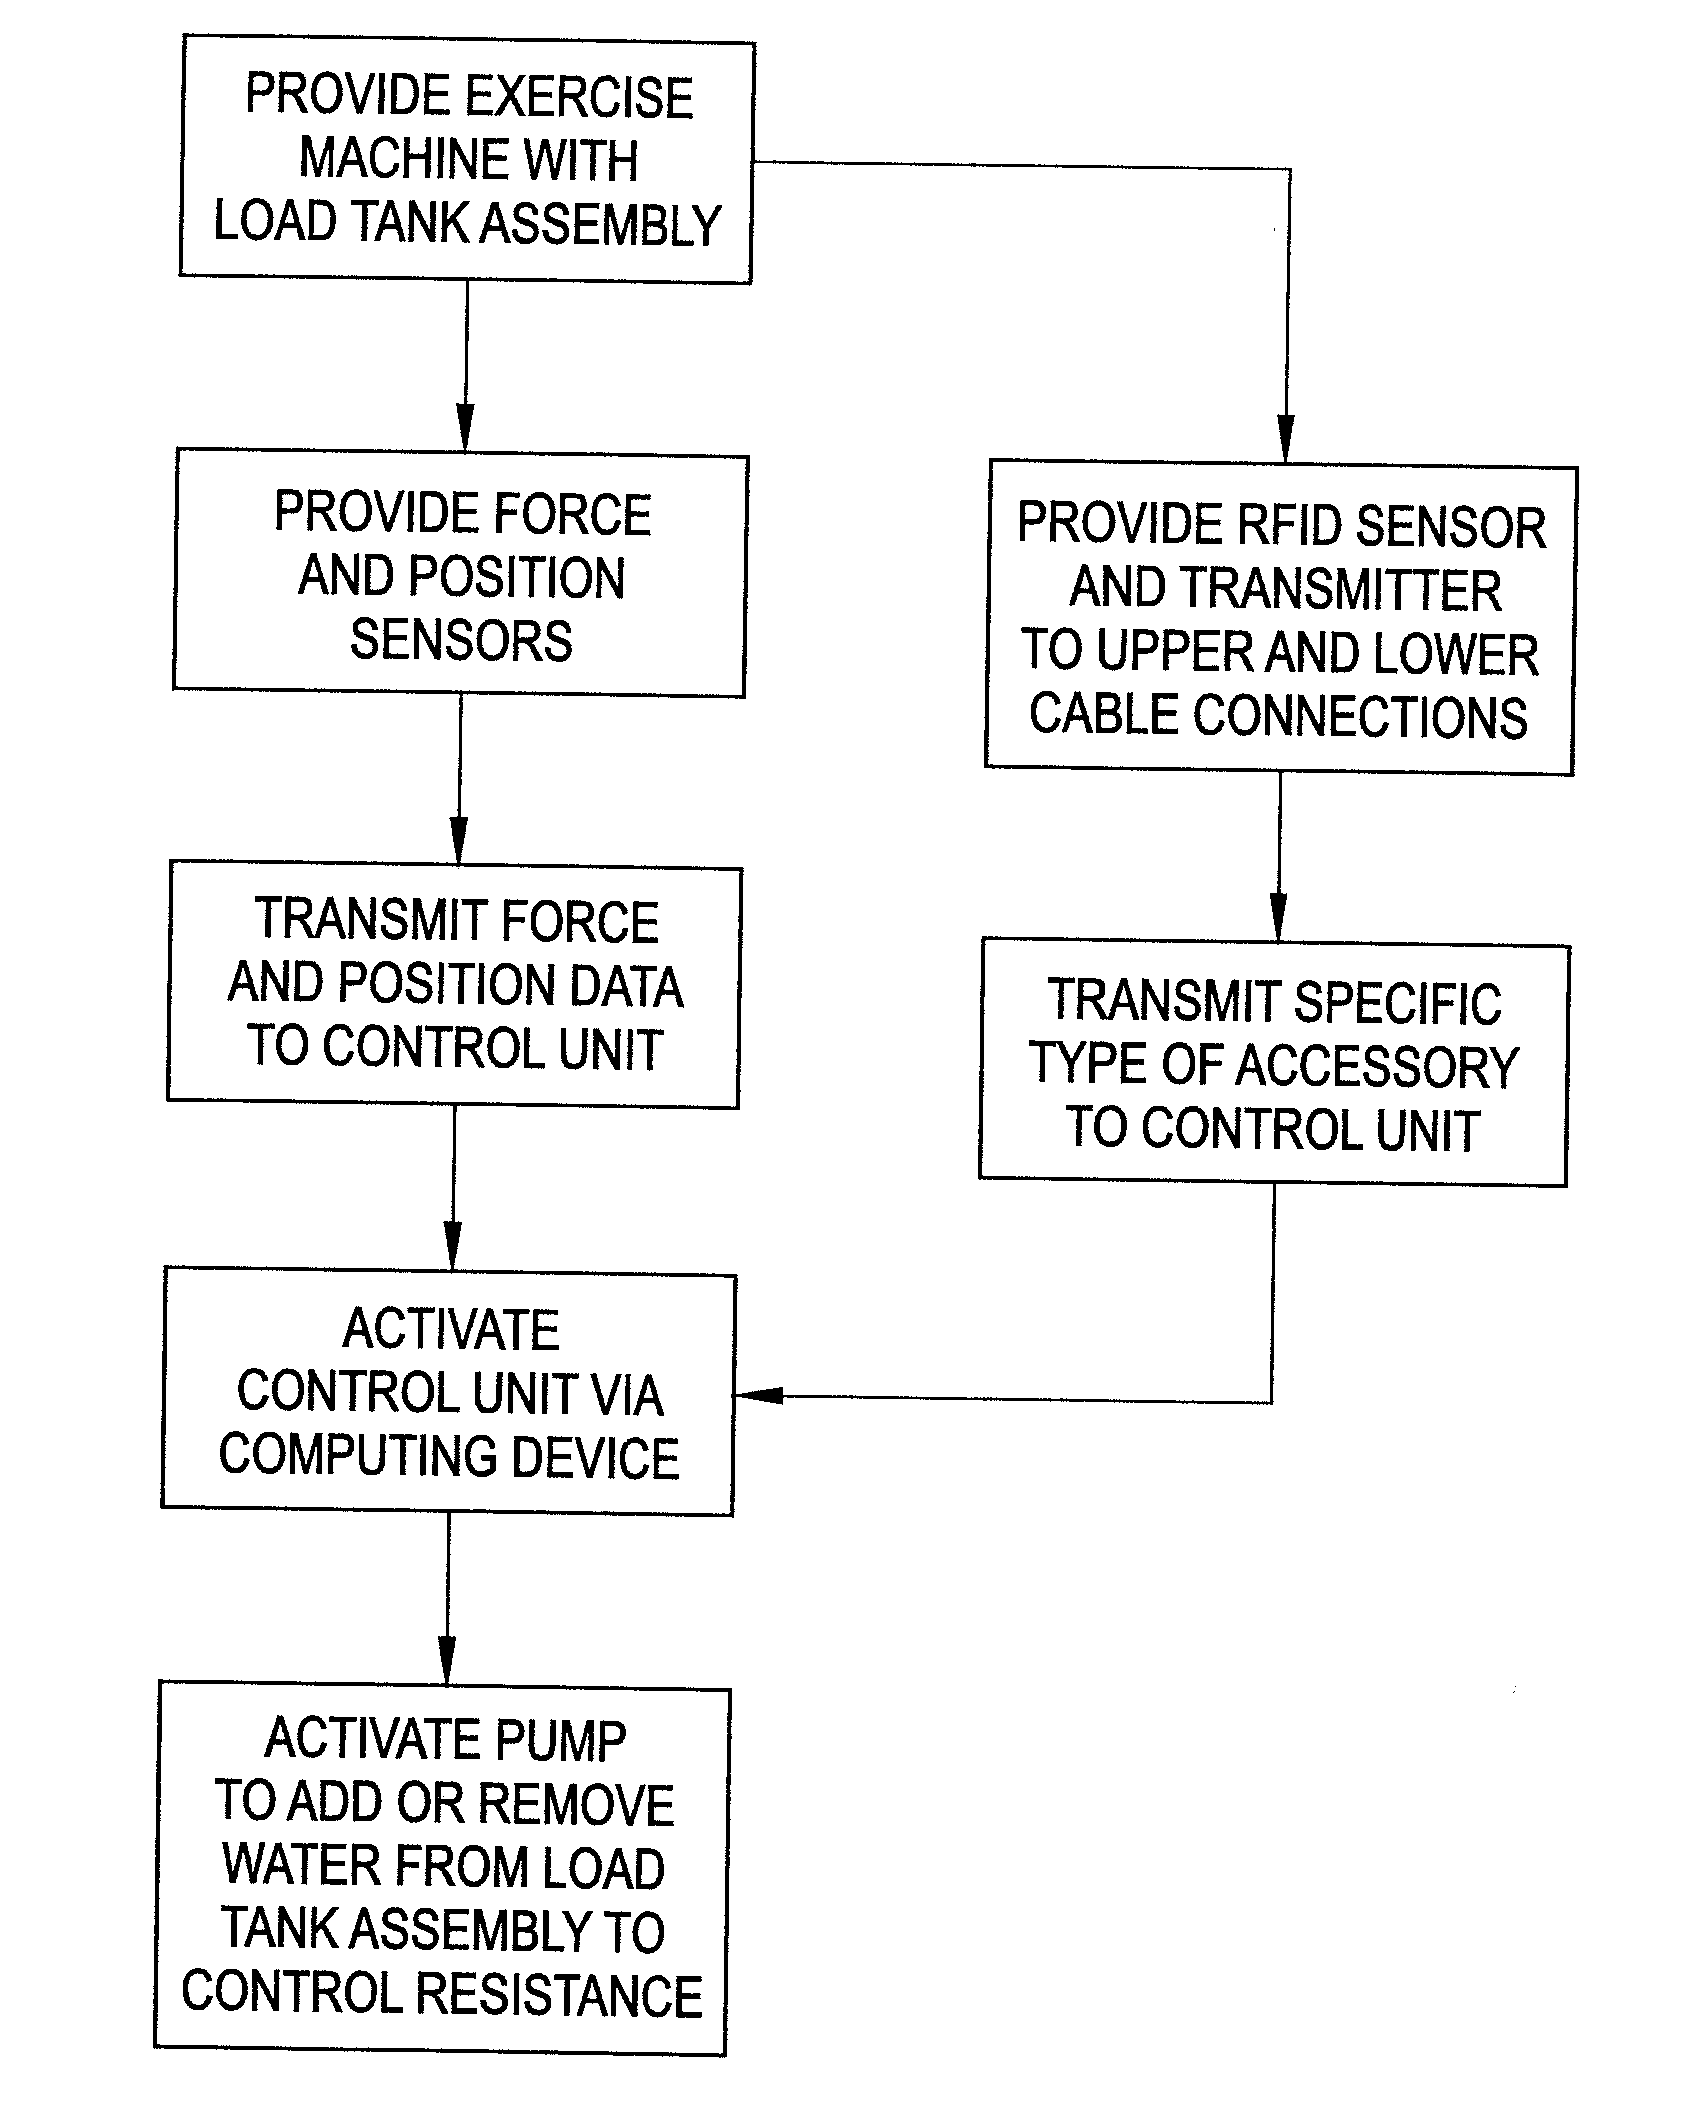 Control system for exercise machine